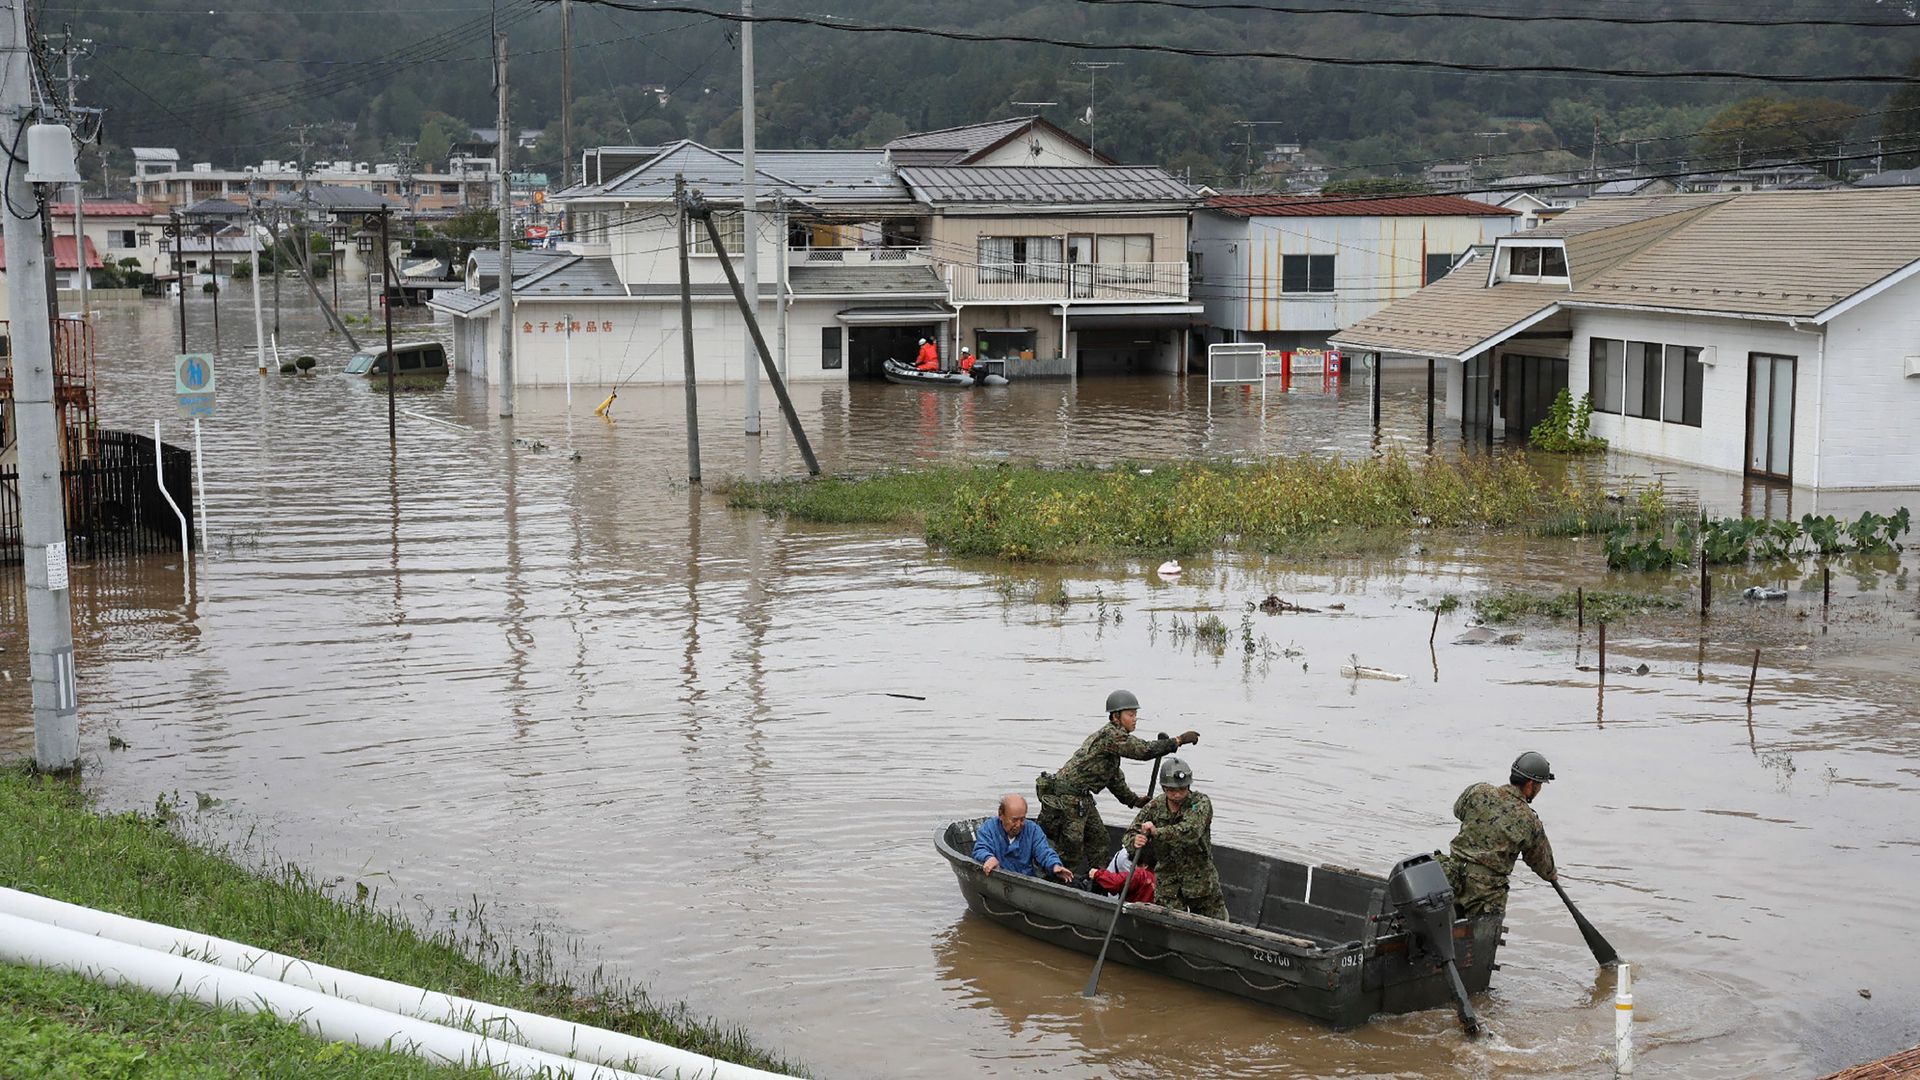 Japan Self-Defense Forces evacuate residents from a flooded area during search and rescue operations in the aftermath of Typhoon Hagibis in Marumori, Miyagi prefecture on October 14, 2019